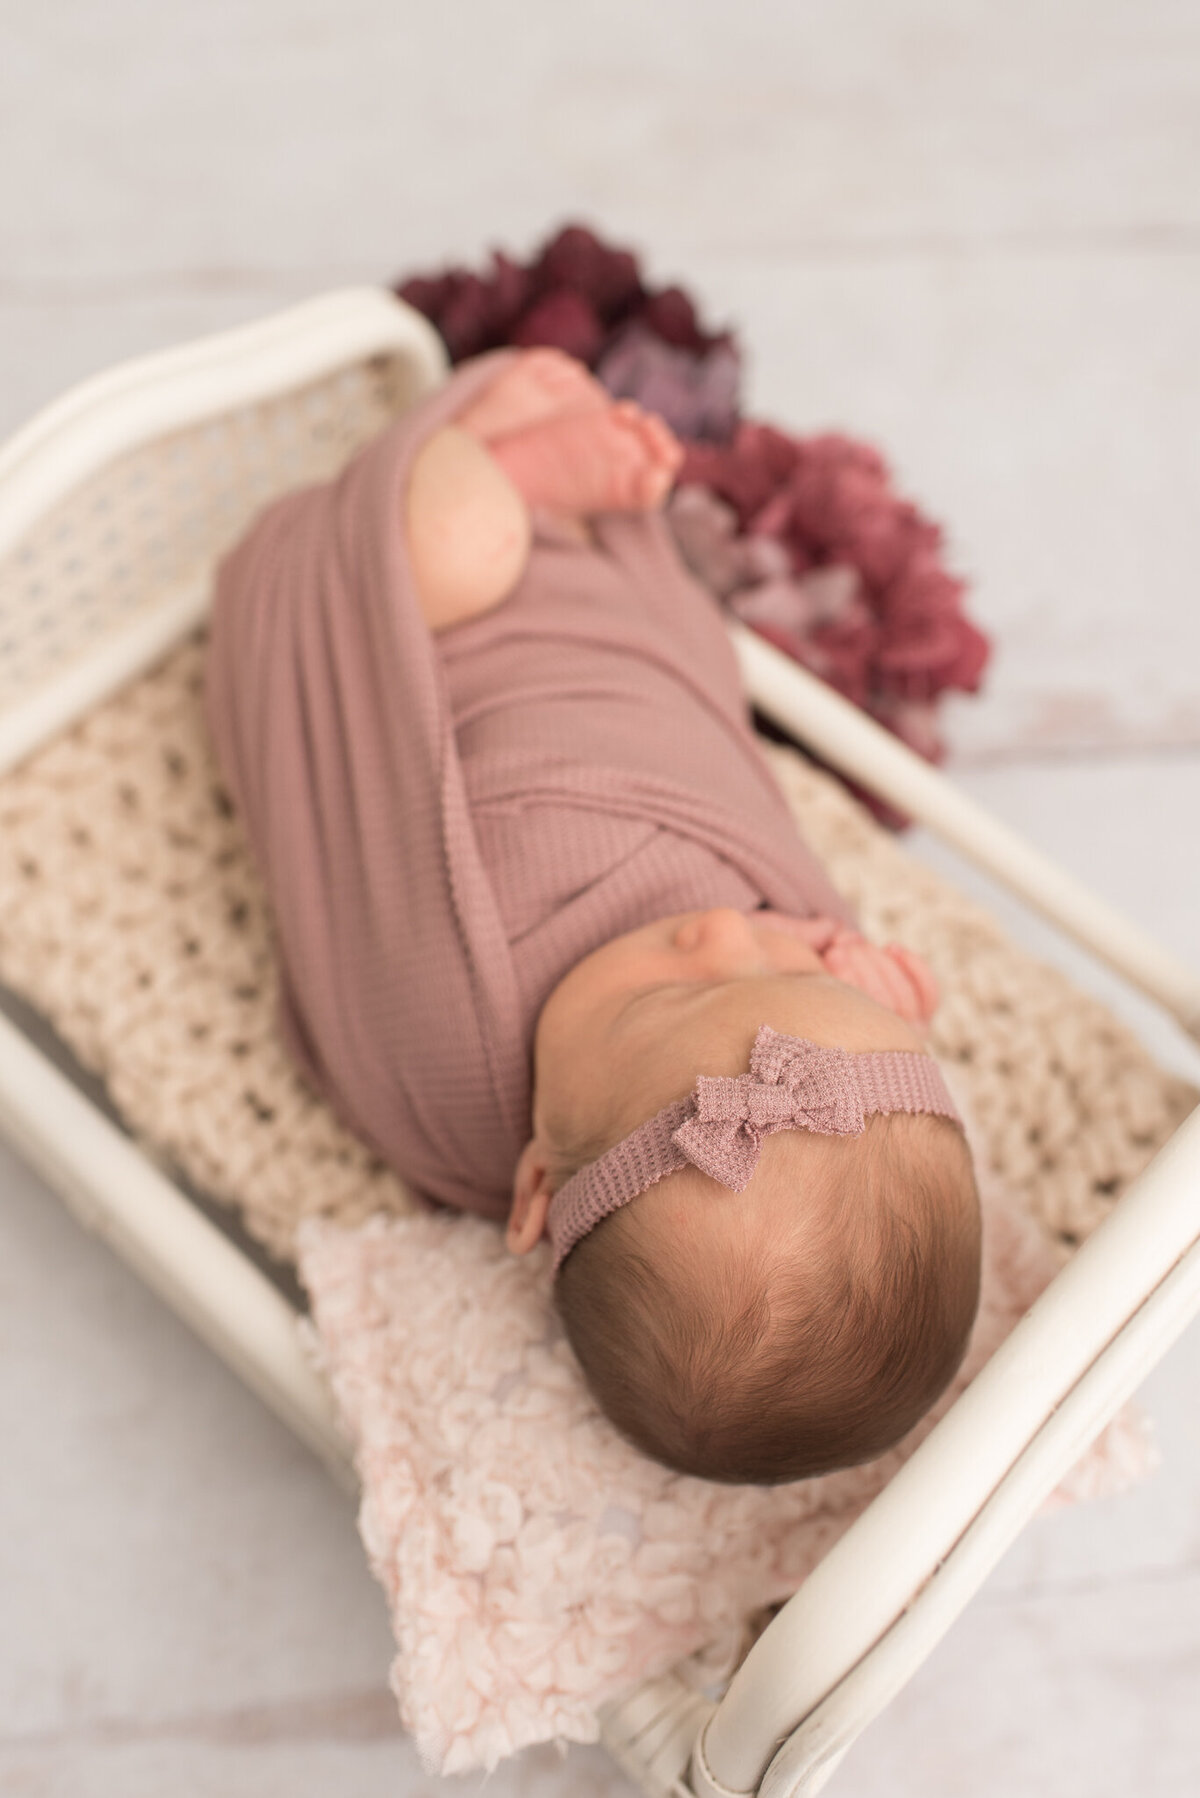 A picture of a newborn girl from the top, lying in a white bed, wrapped in mauve with hydrangeas around her.